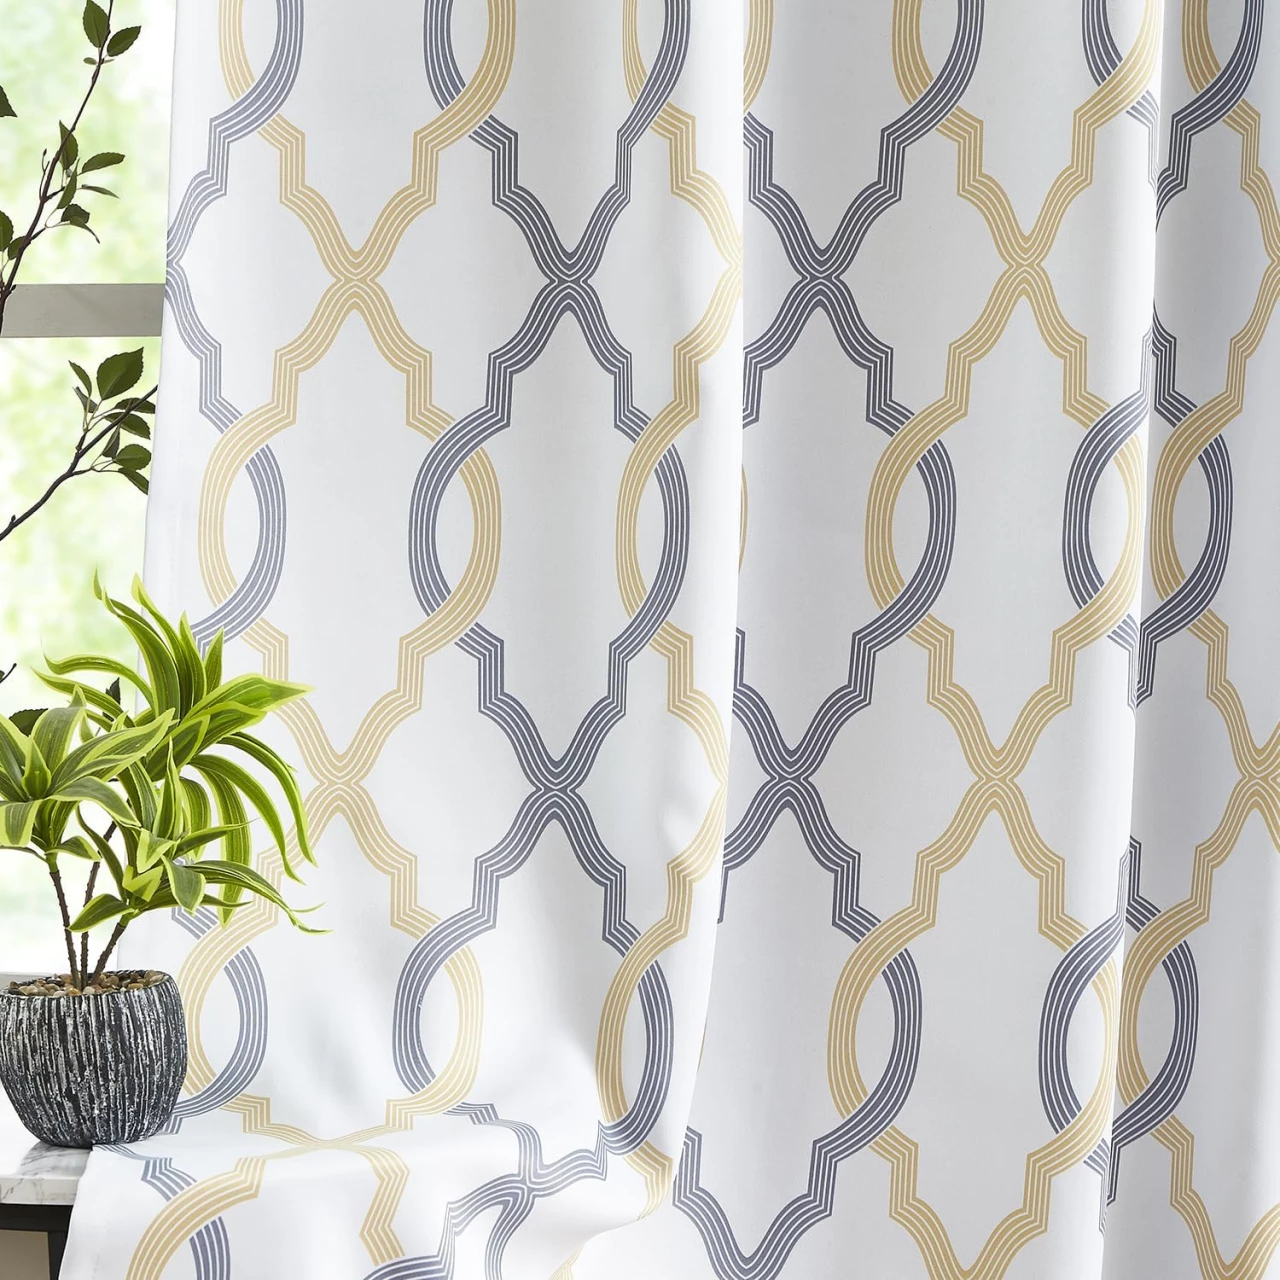 Full Blackout Curtains Yellow Grey Moroccan Tile Printed Geo Energy Efficient Rod Pocket Window Panels